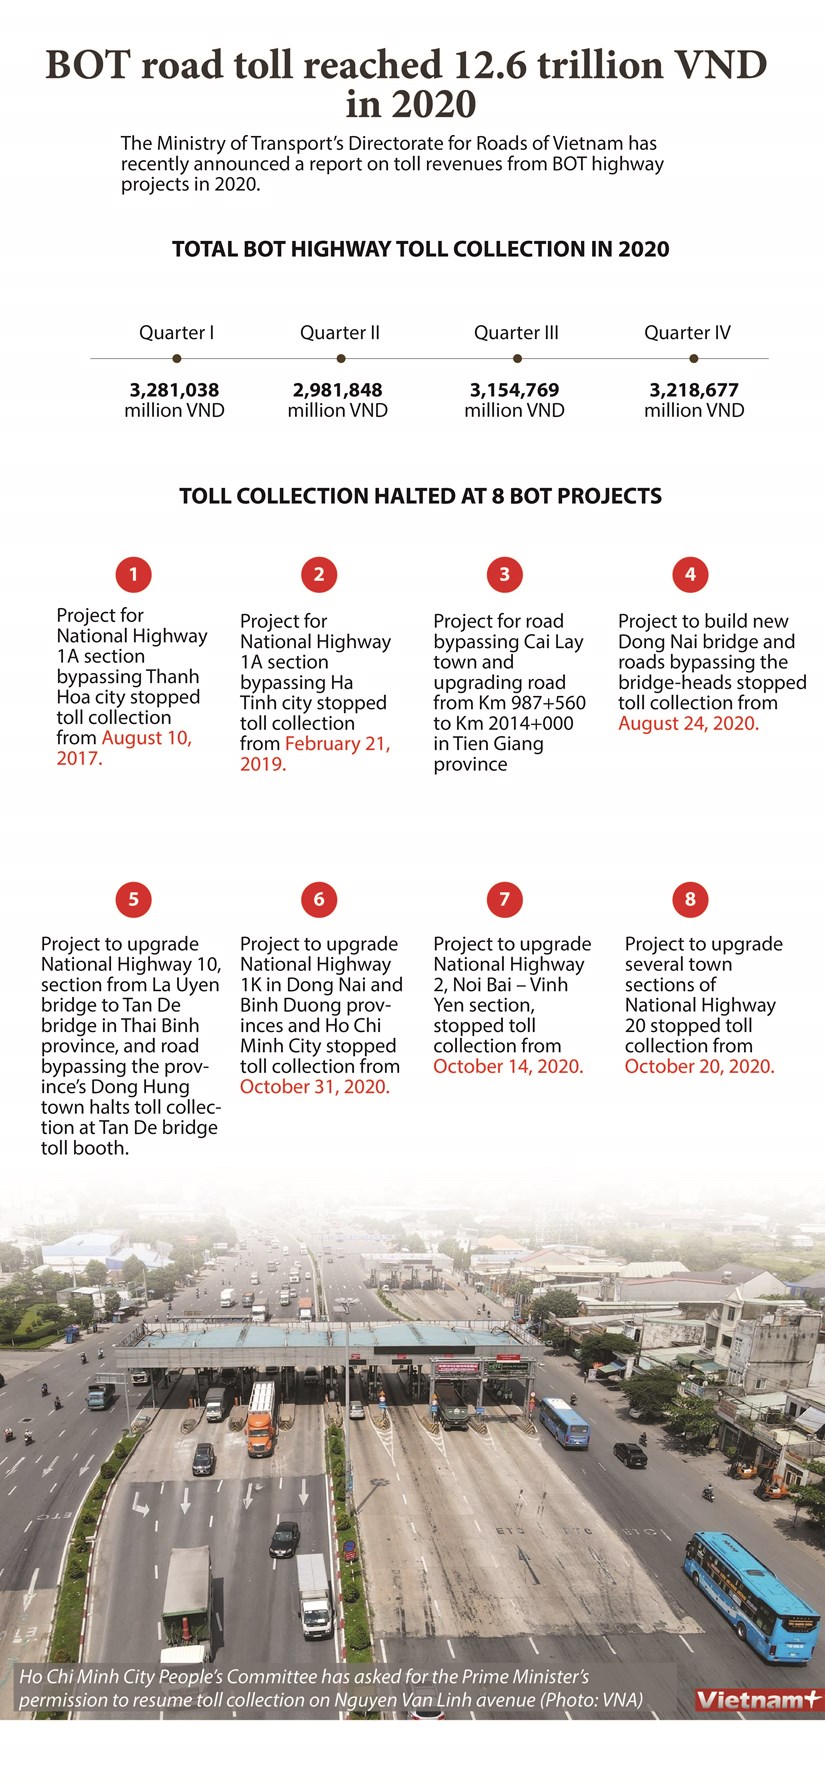 BOT road toll reaches 12.6 trillion VND in 2020 hinh anh 1